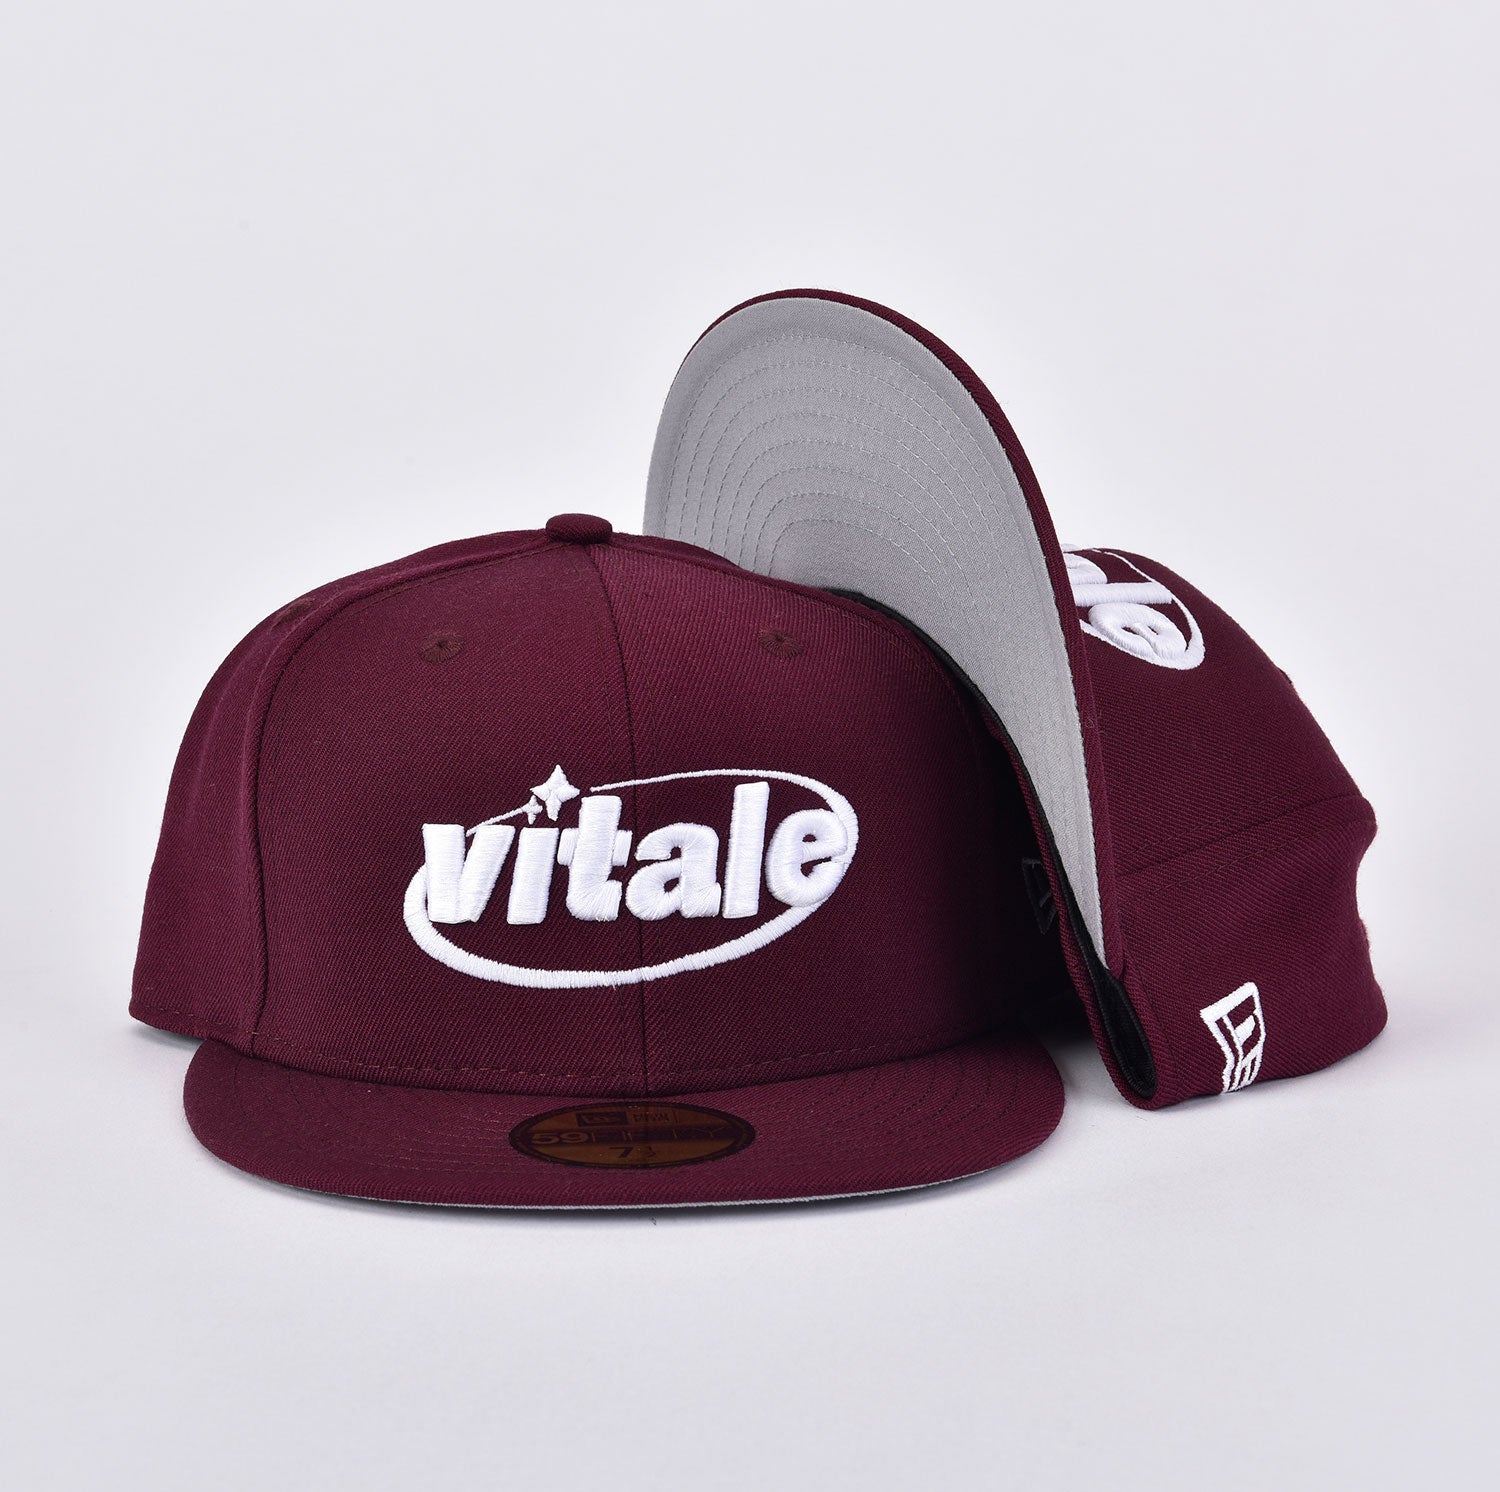 VITALE 59FIFTY NEW ERA FITTED HAT IN MAROON